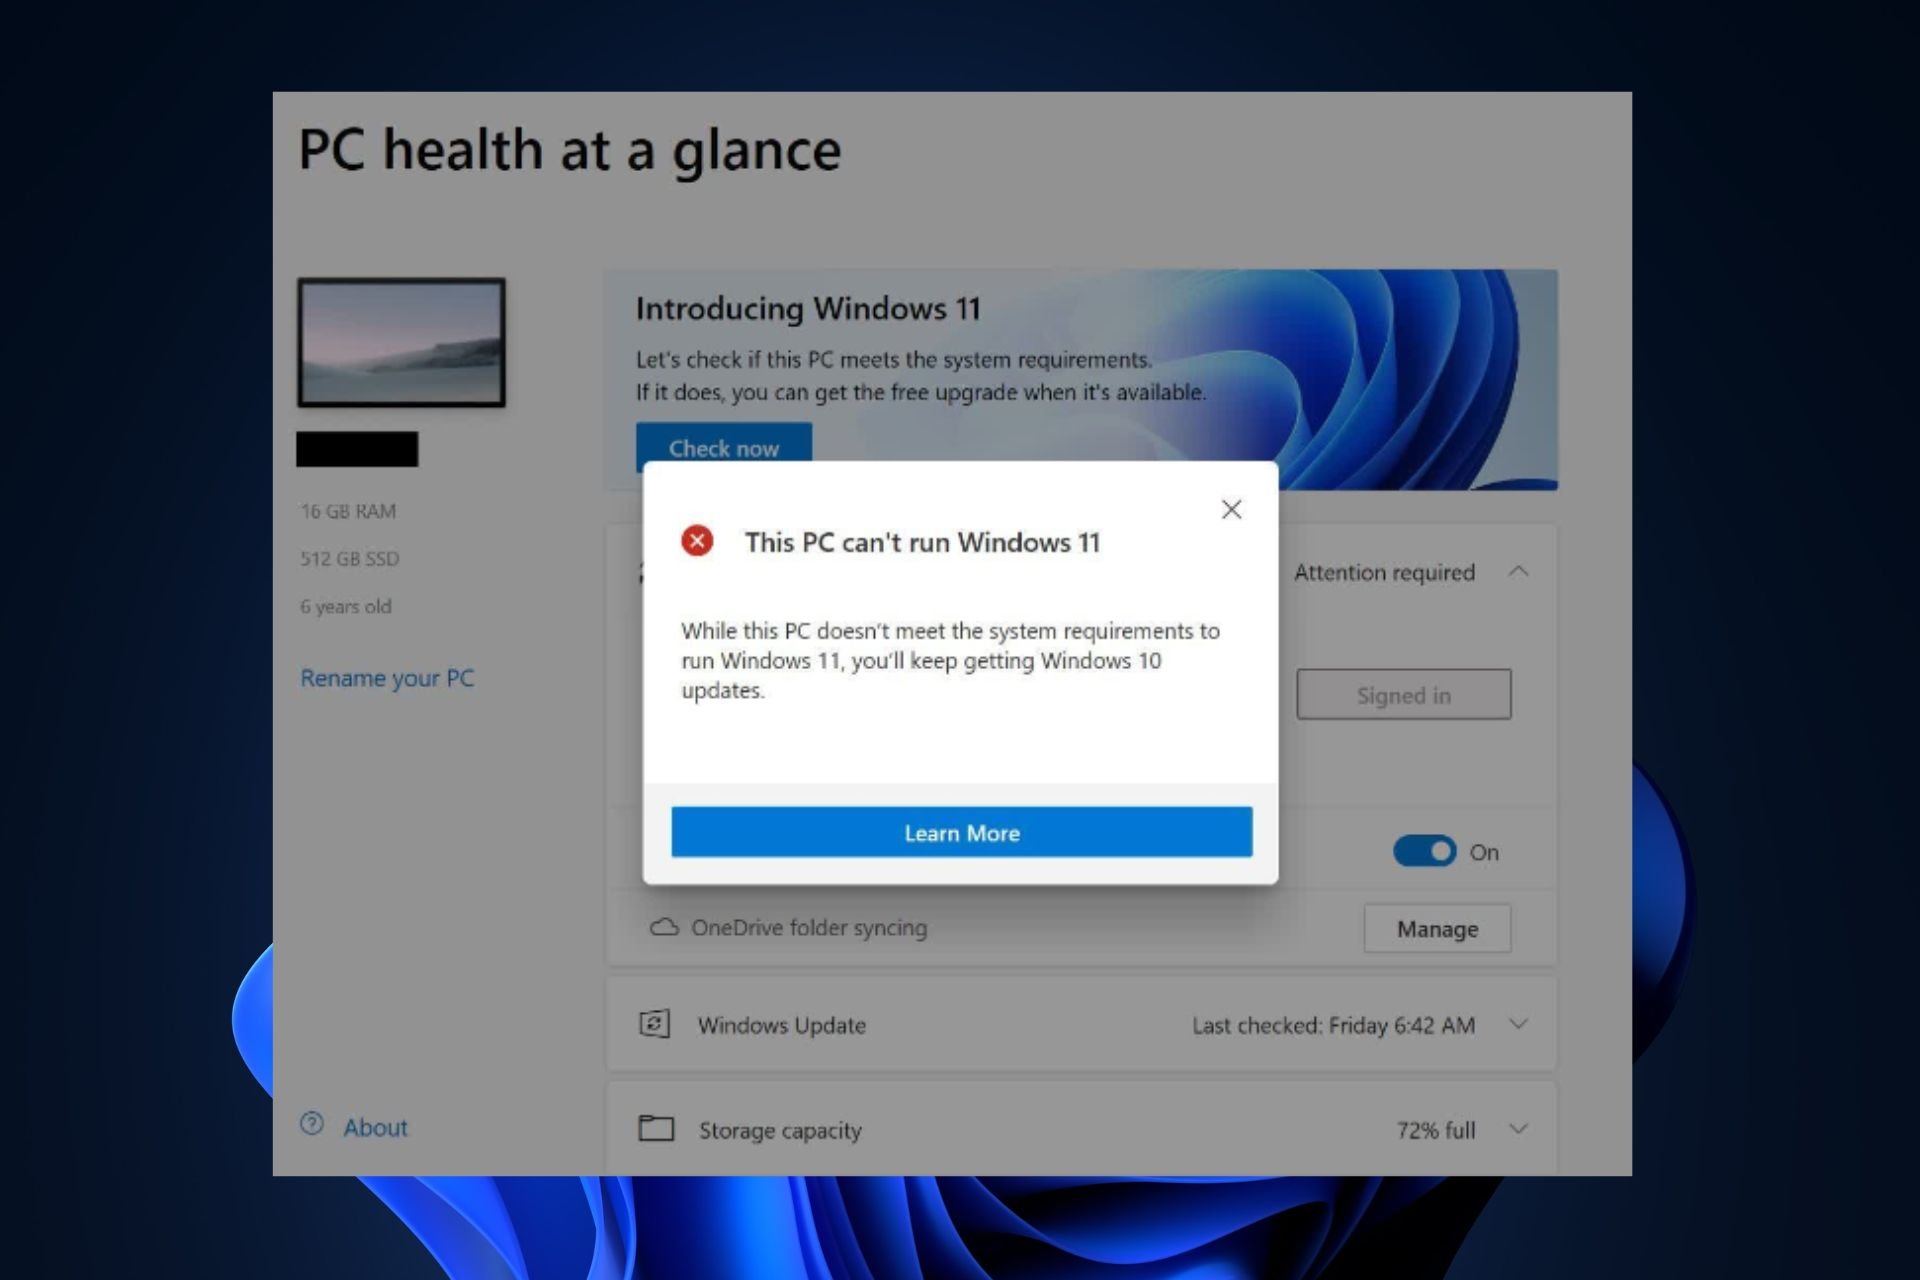 Windows 11 system requirements a pain? Know the hack to bypass them